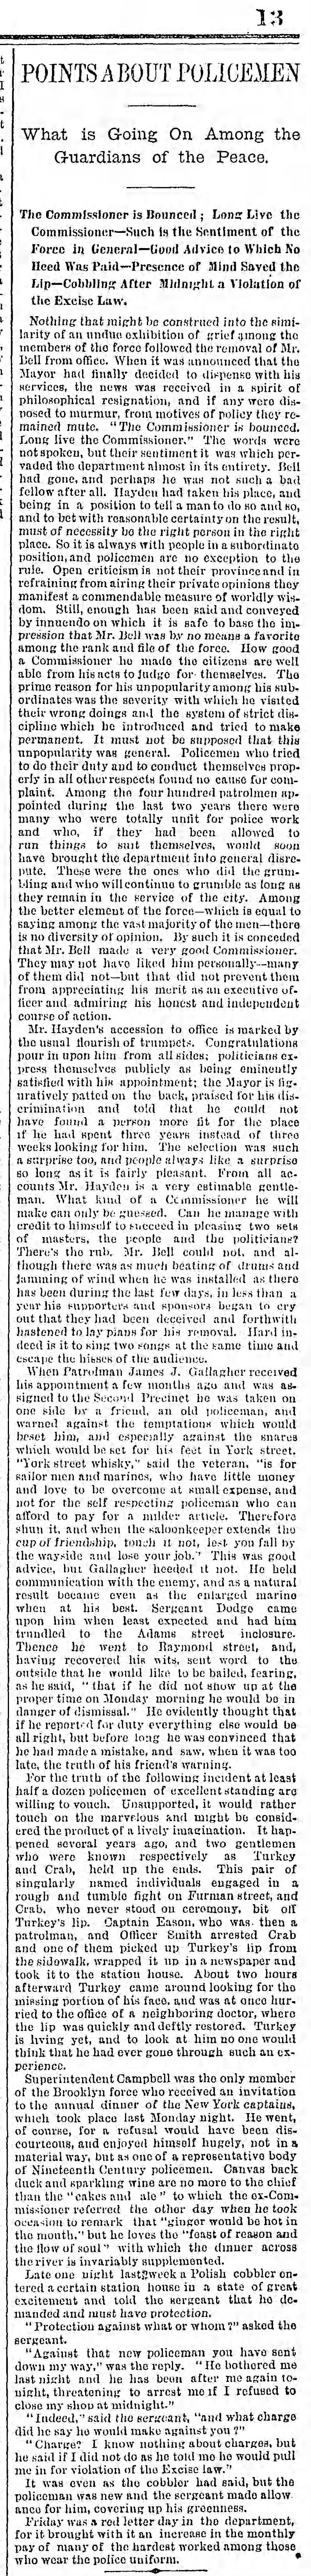 "Points About Policemen" Series.  The Brooklyn Daily Eagle.  Sunday, February 2, 1890.